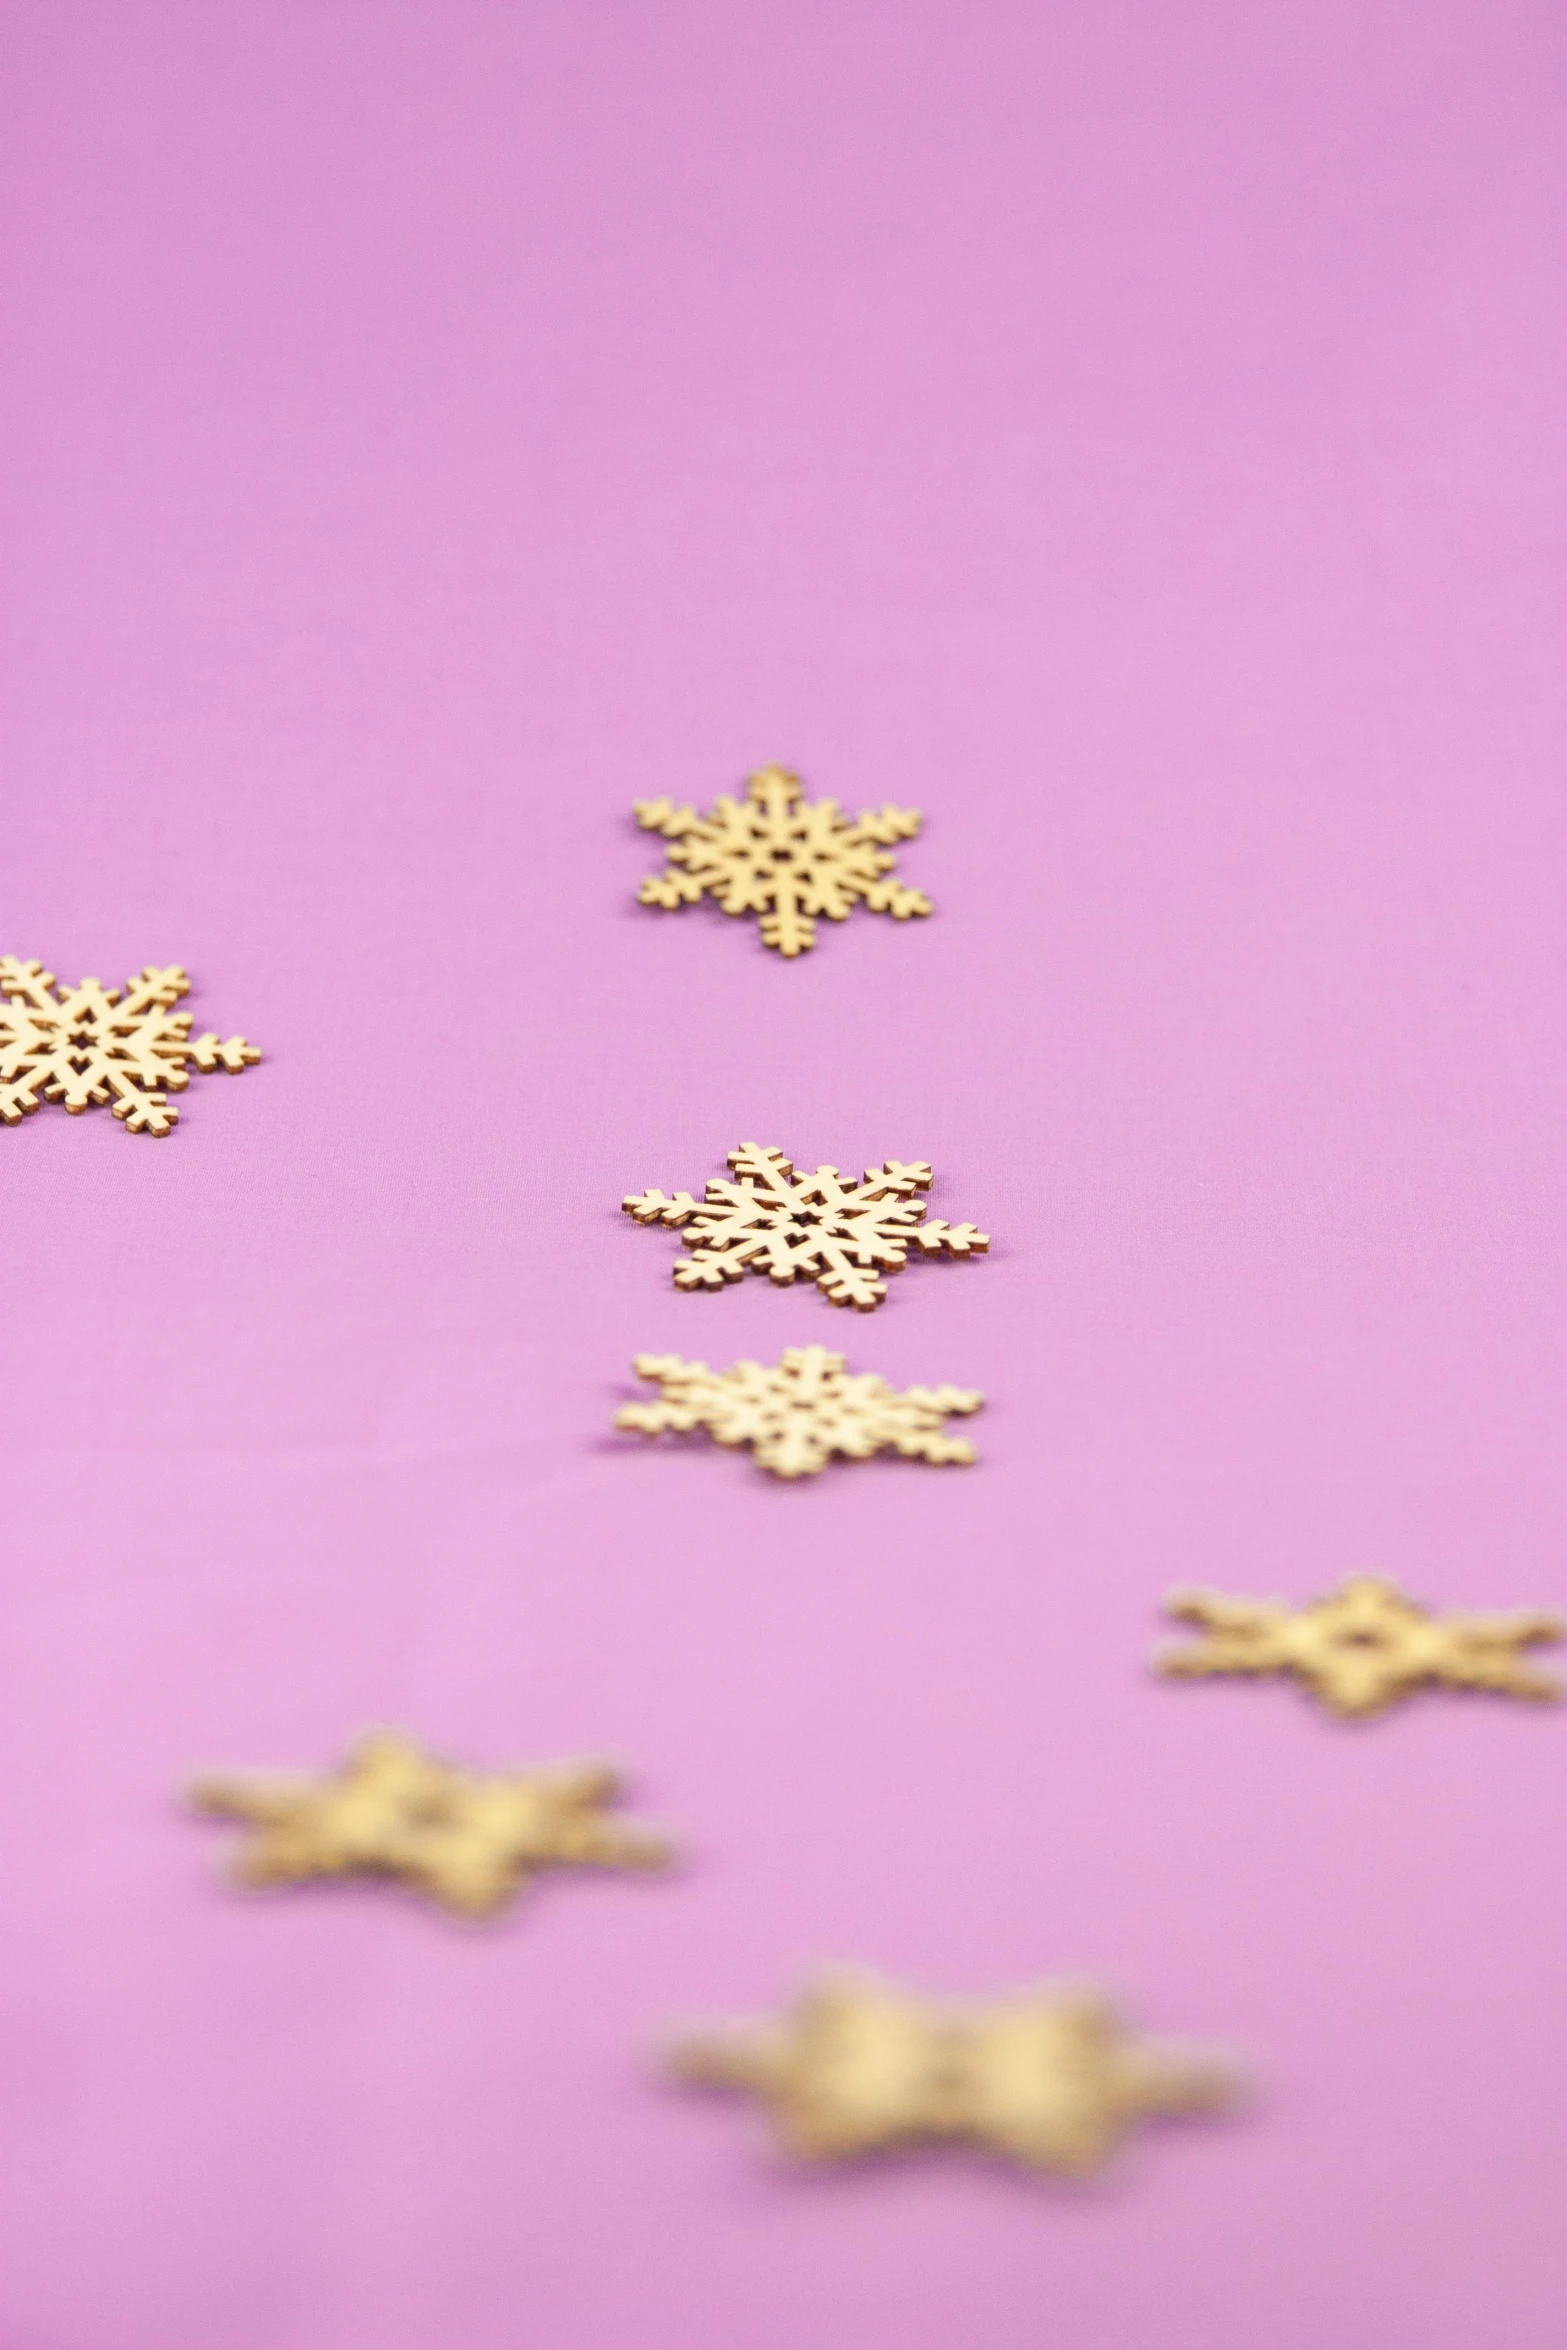 gold snowflakes on a purple background, trending on pexels, process art, mini model, pink background, wooden decoration, light scatter